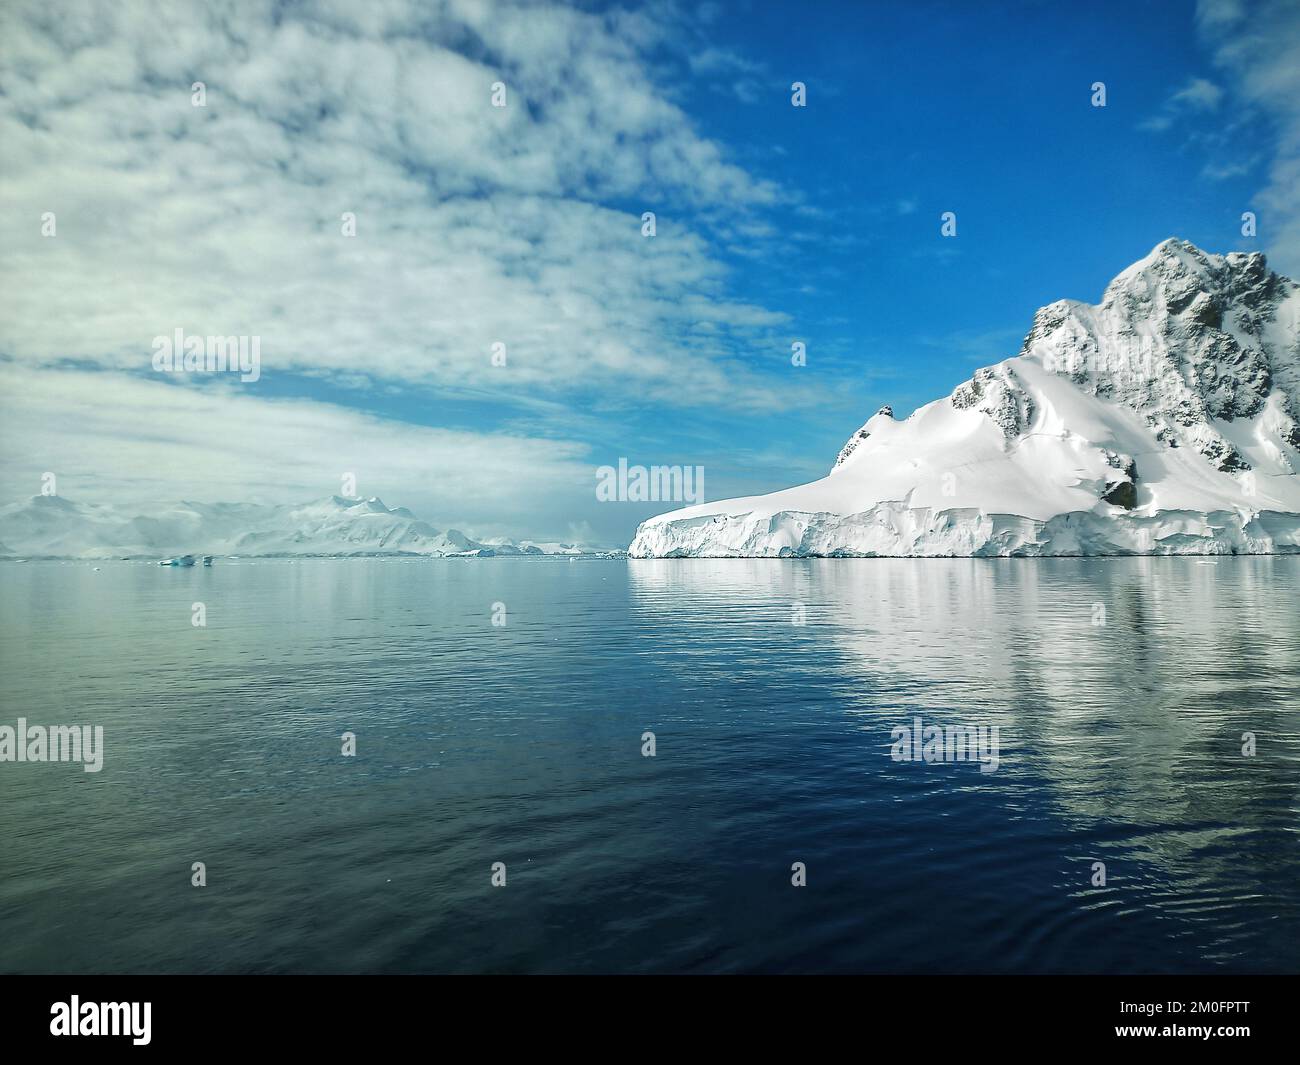 orne harbour,antarctica,antartica,antarctica landscape,nature,ice filled mountains,icy mountains,climate change,antactic peninsula,ice bergs Stock Photo